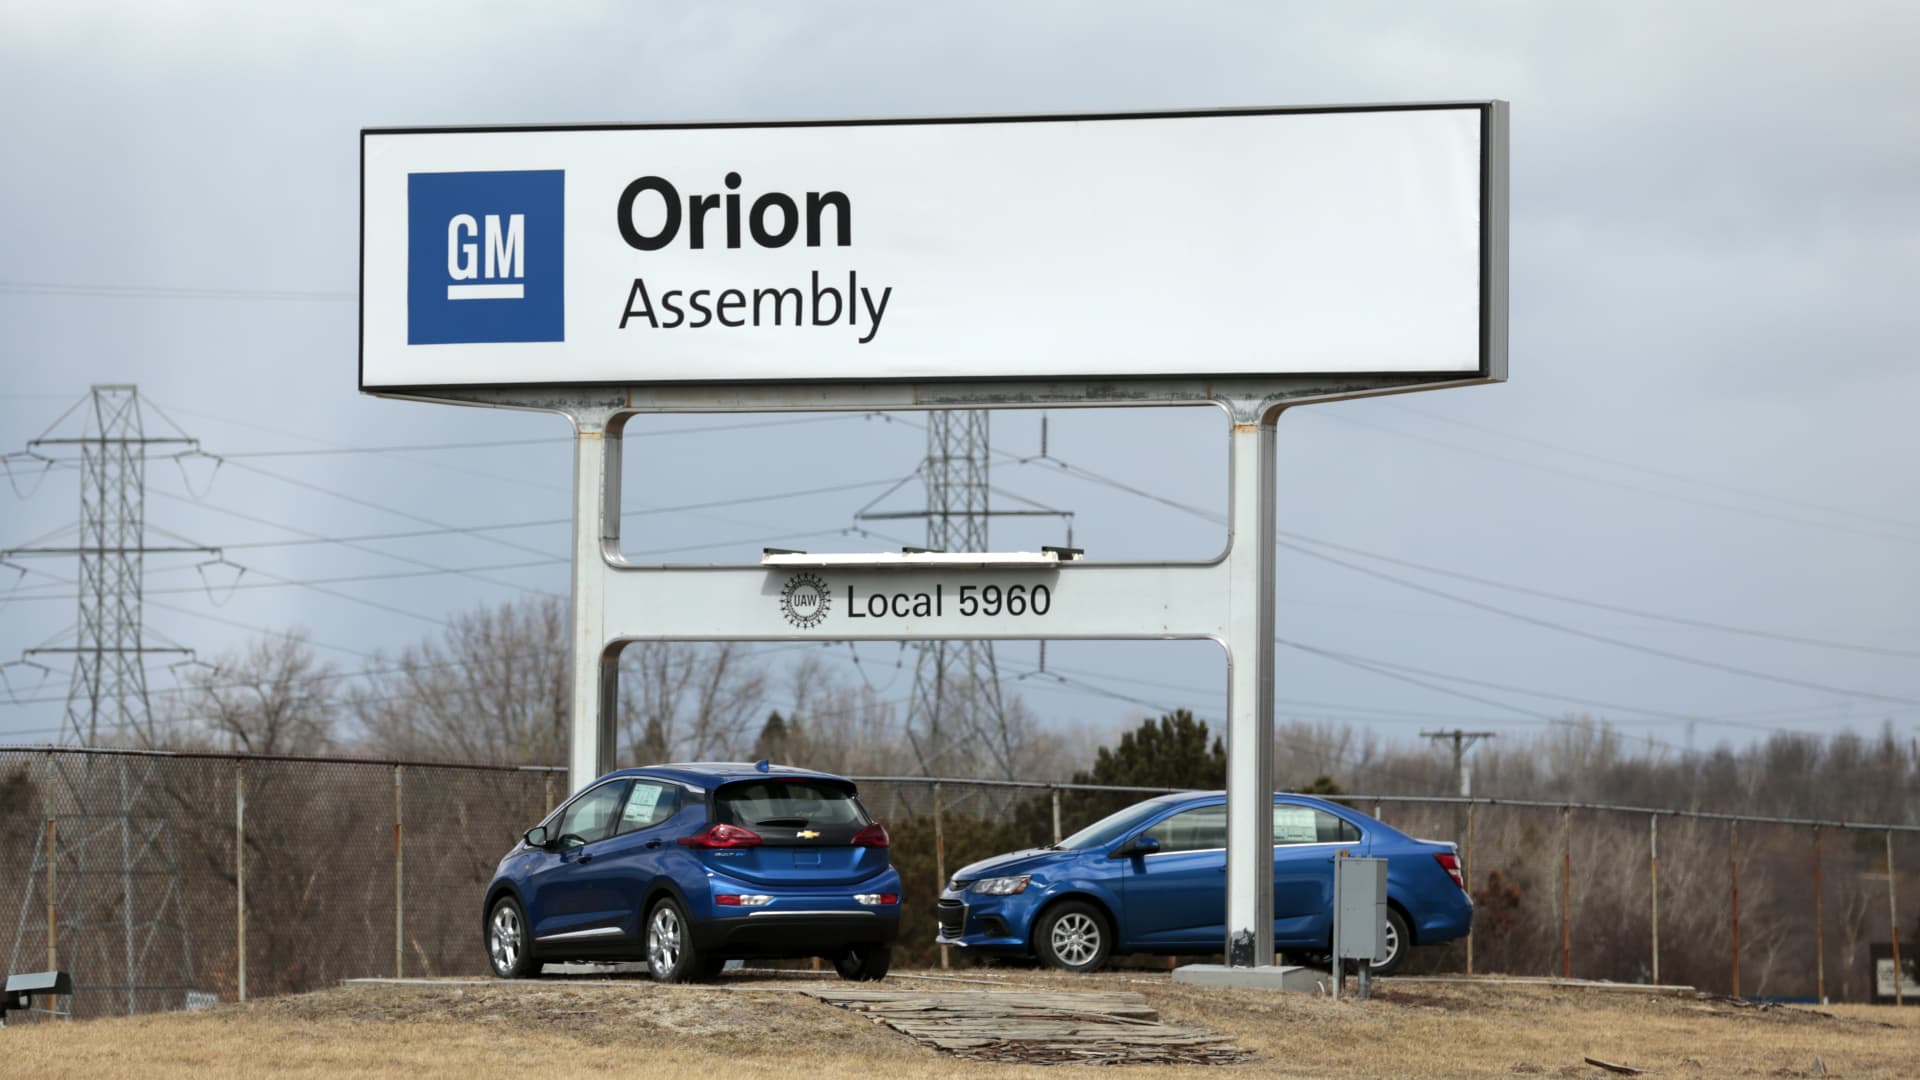 Signage stands on display outside the General Motors Co. Orion Assembly plant in Orion Township, Michigan, U.S., on Friday, March 22, 2019.